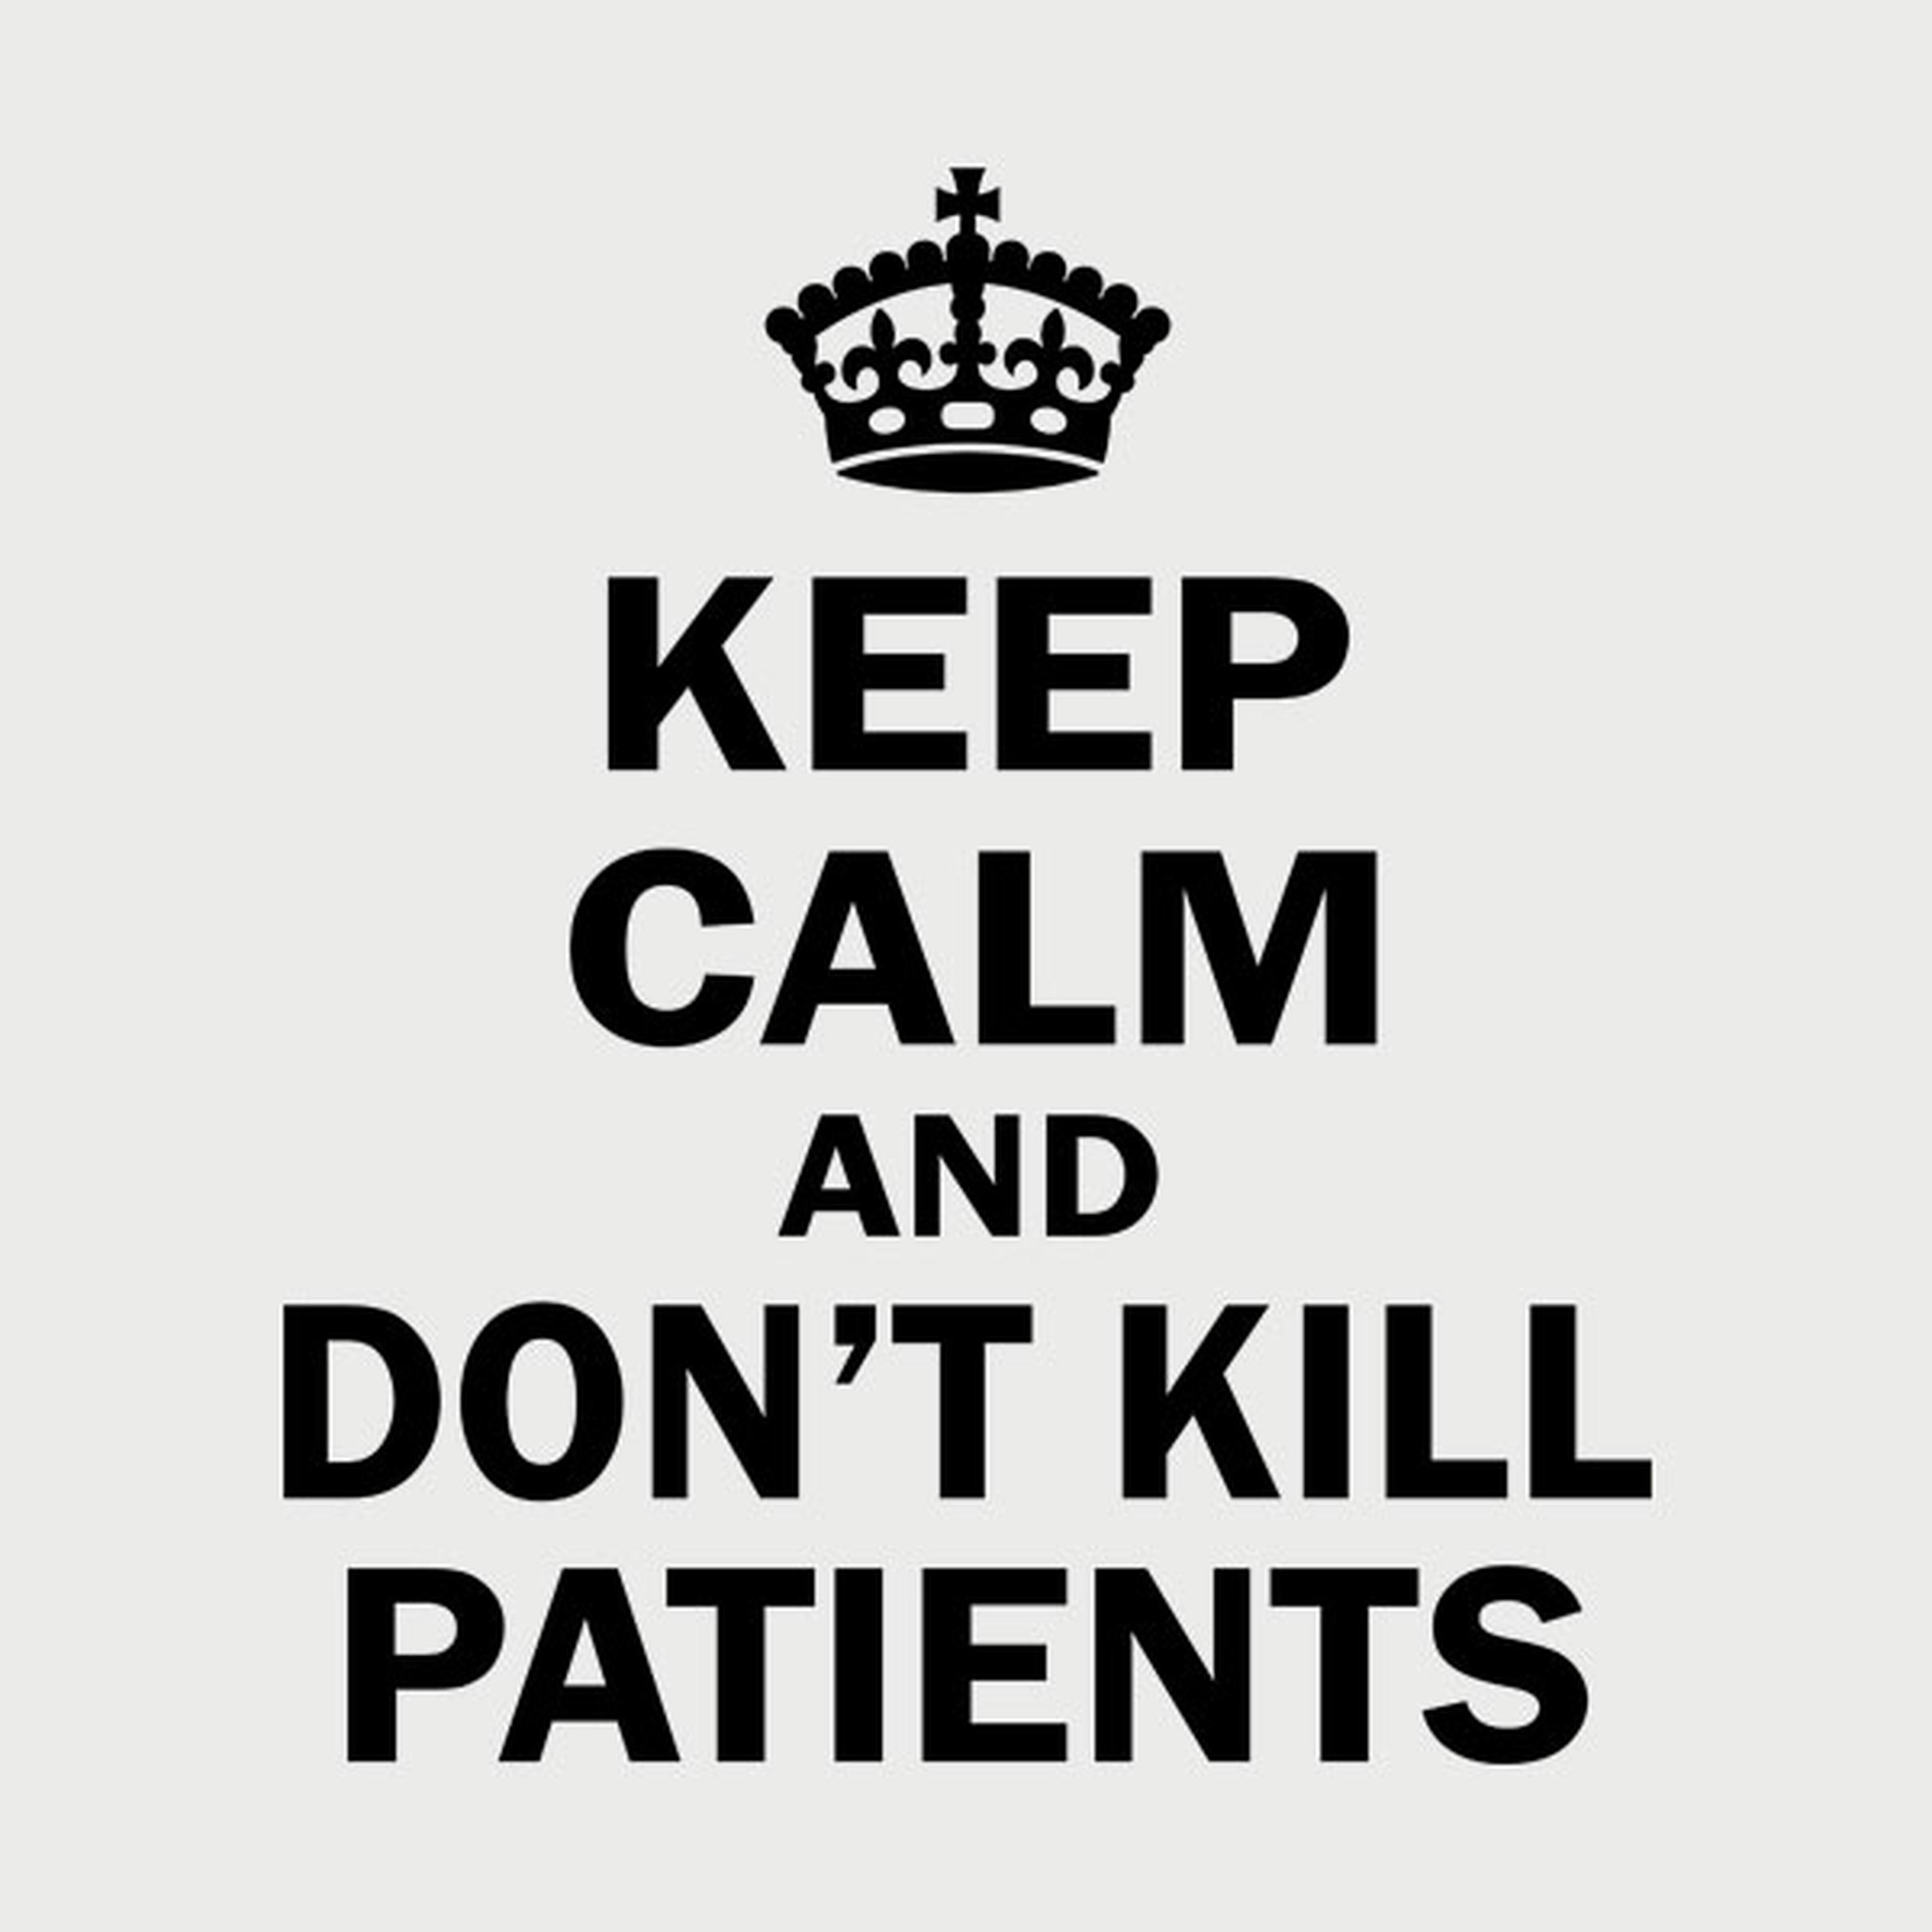 Keep calm and don't kill patients - T-shirt